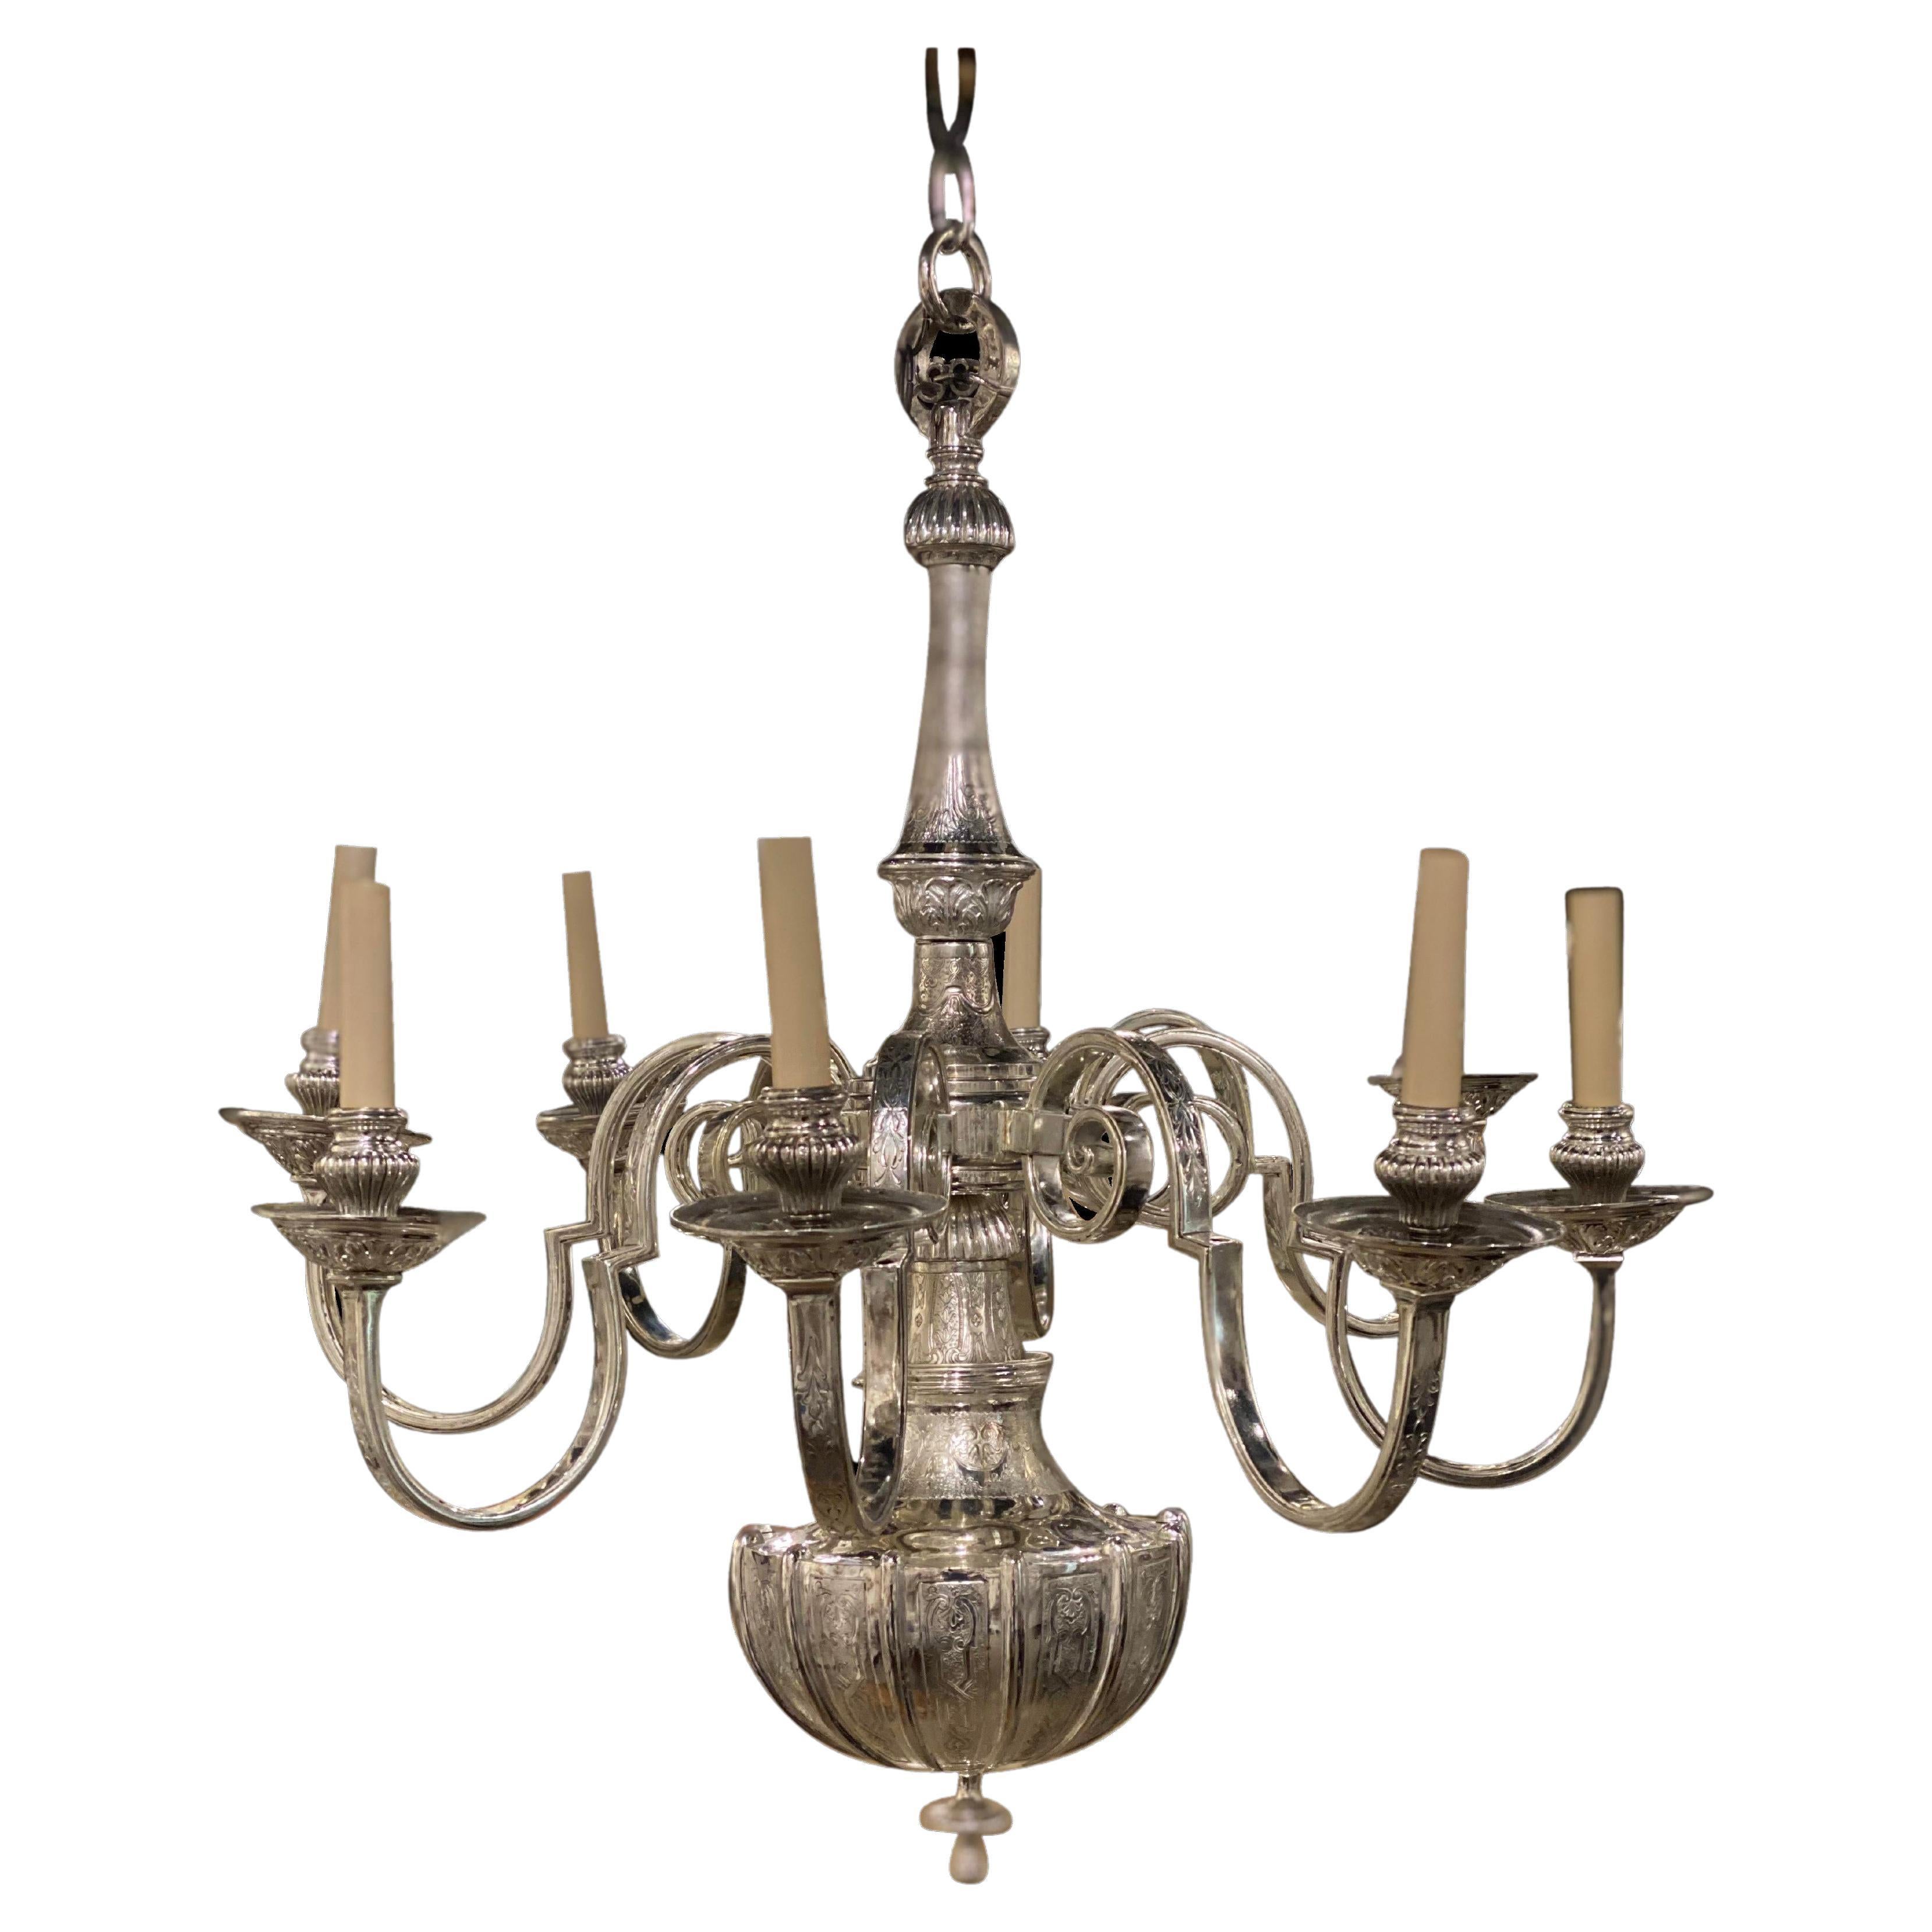 1920's Silver Plated Caldwell Engraved Chandelier with For Sale